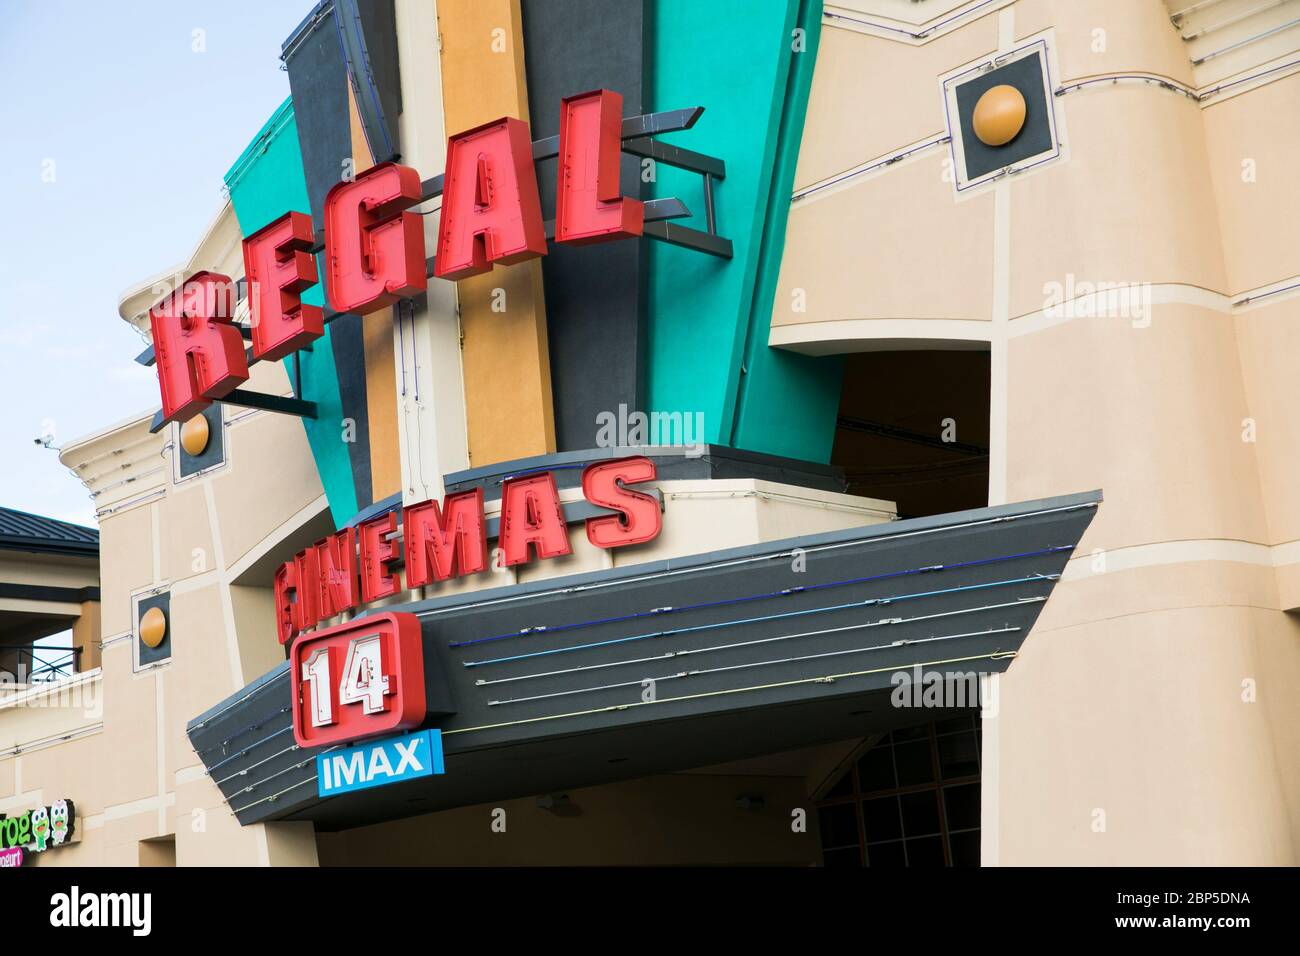 A logo sign outside of a Regal Cinemas movie theater location in Richmond, Virginia on May 13, 2020. Stock Photo